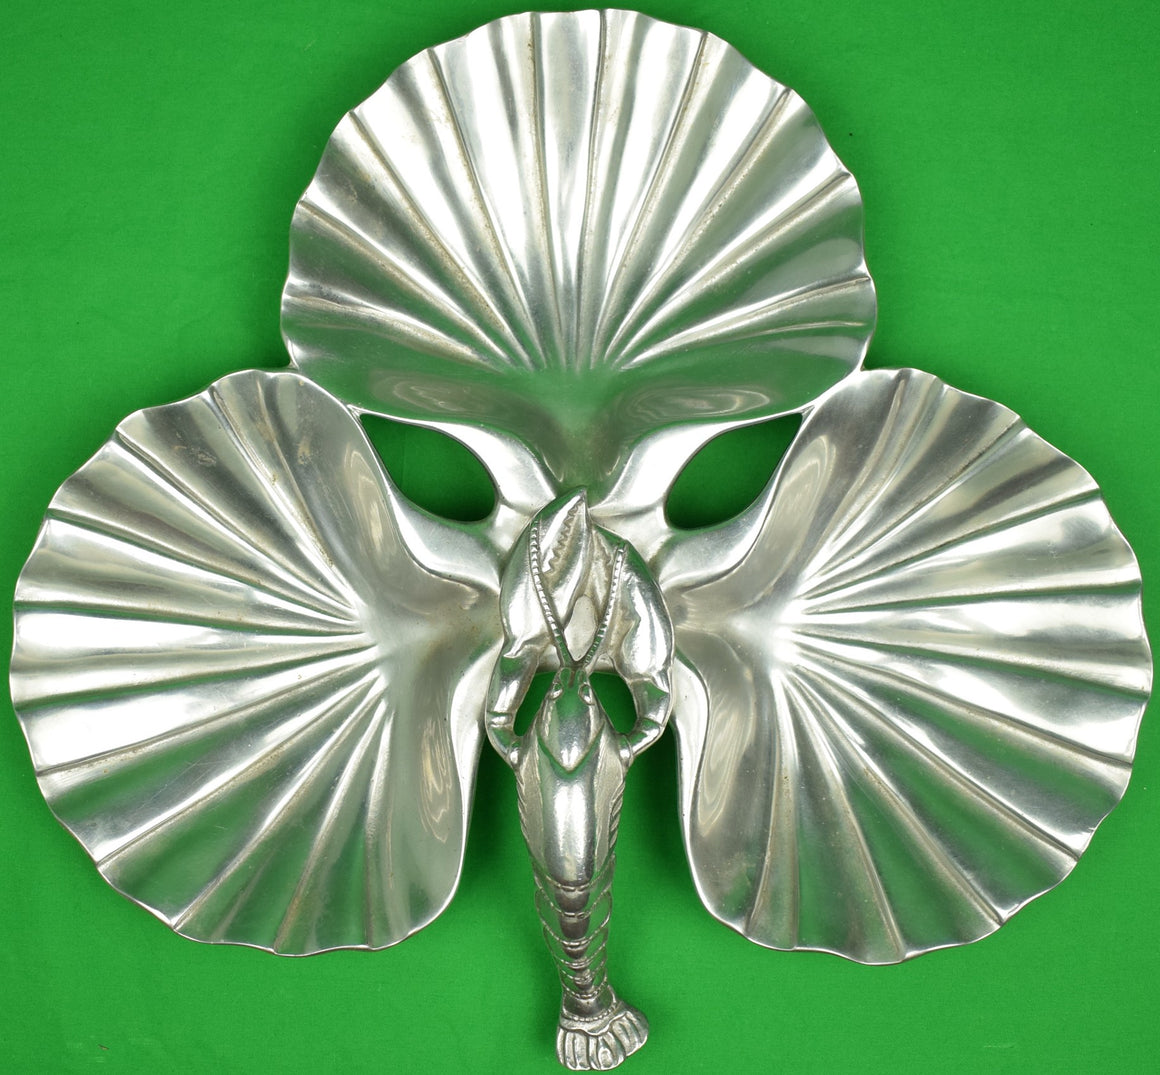 "Tri-Scallop Shell Aluminum Lobster Serving Tray"